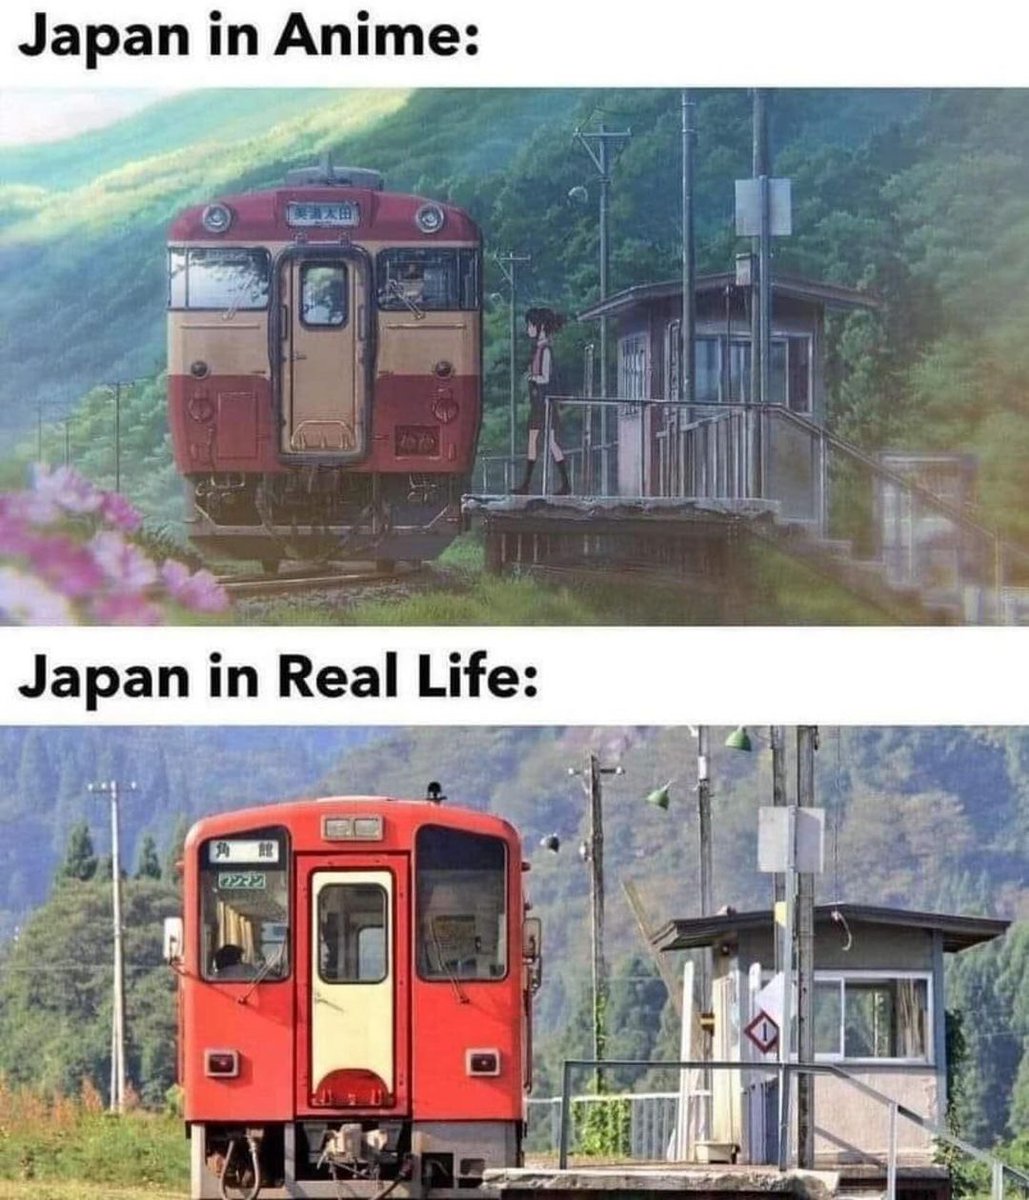 Why does the anime look more real?